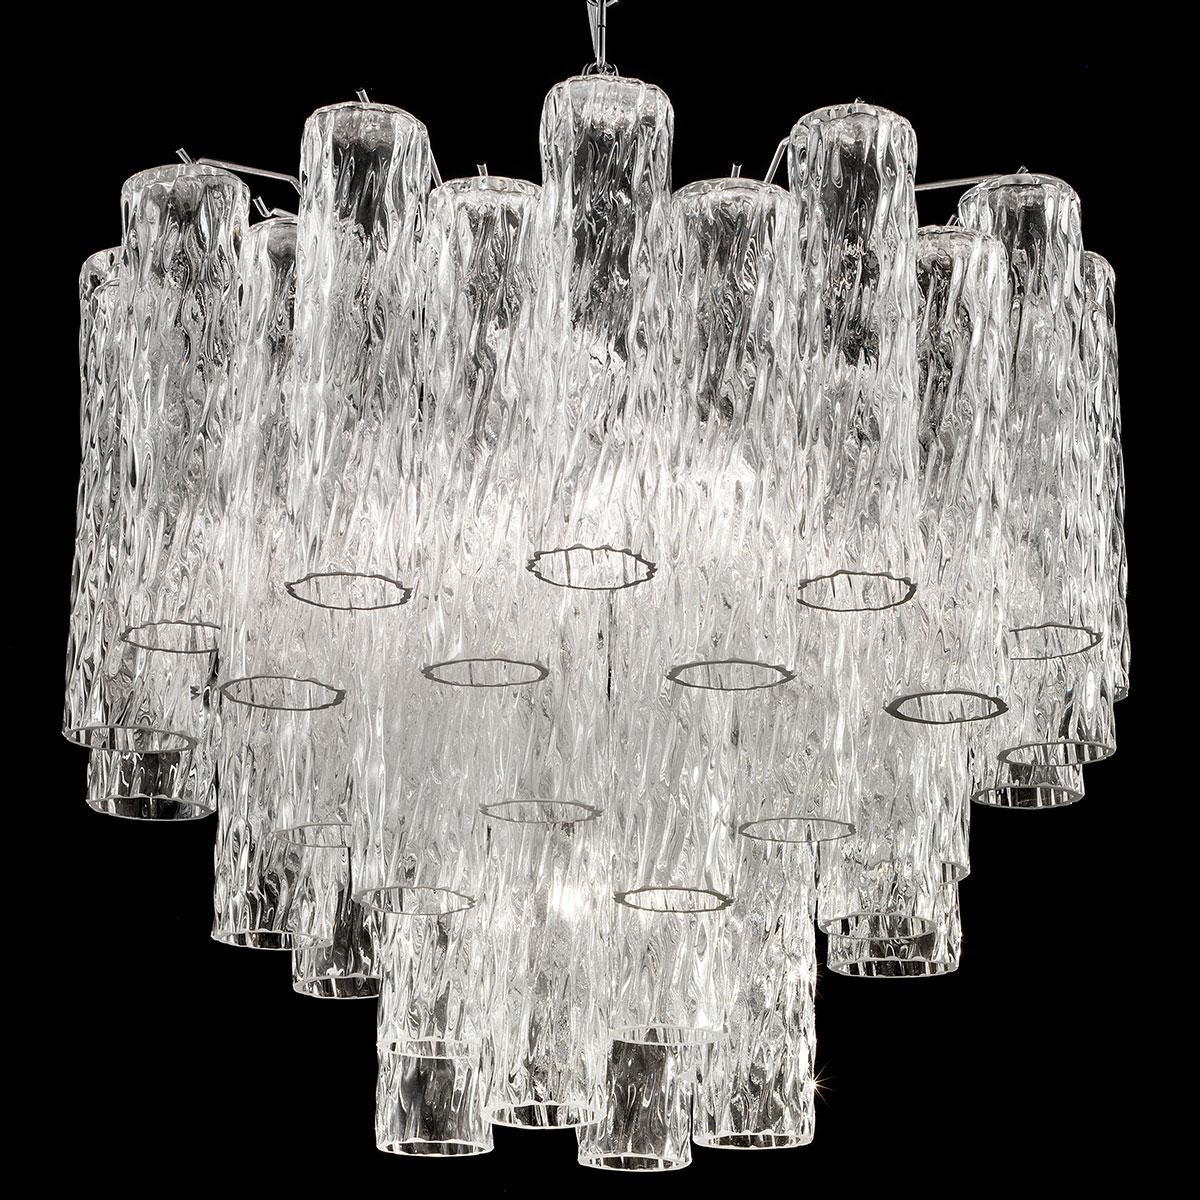 "Tronchi" large Murano glass chandelier - 7 lights - transparent and chrome